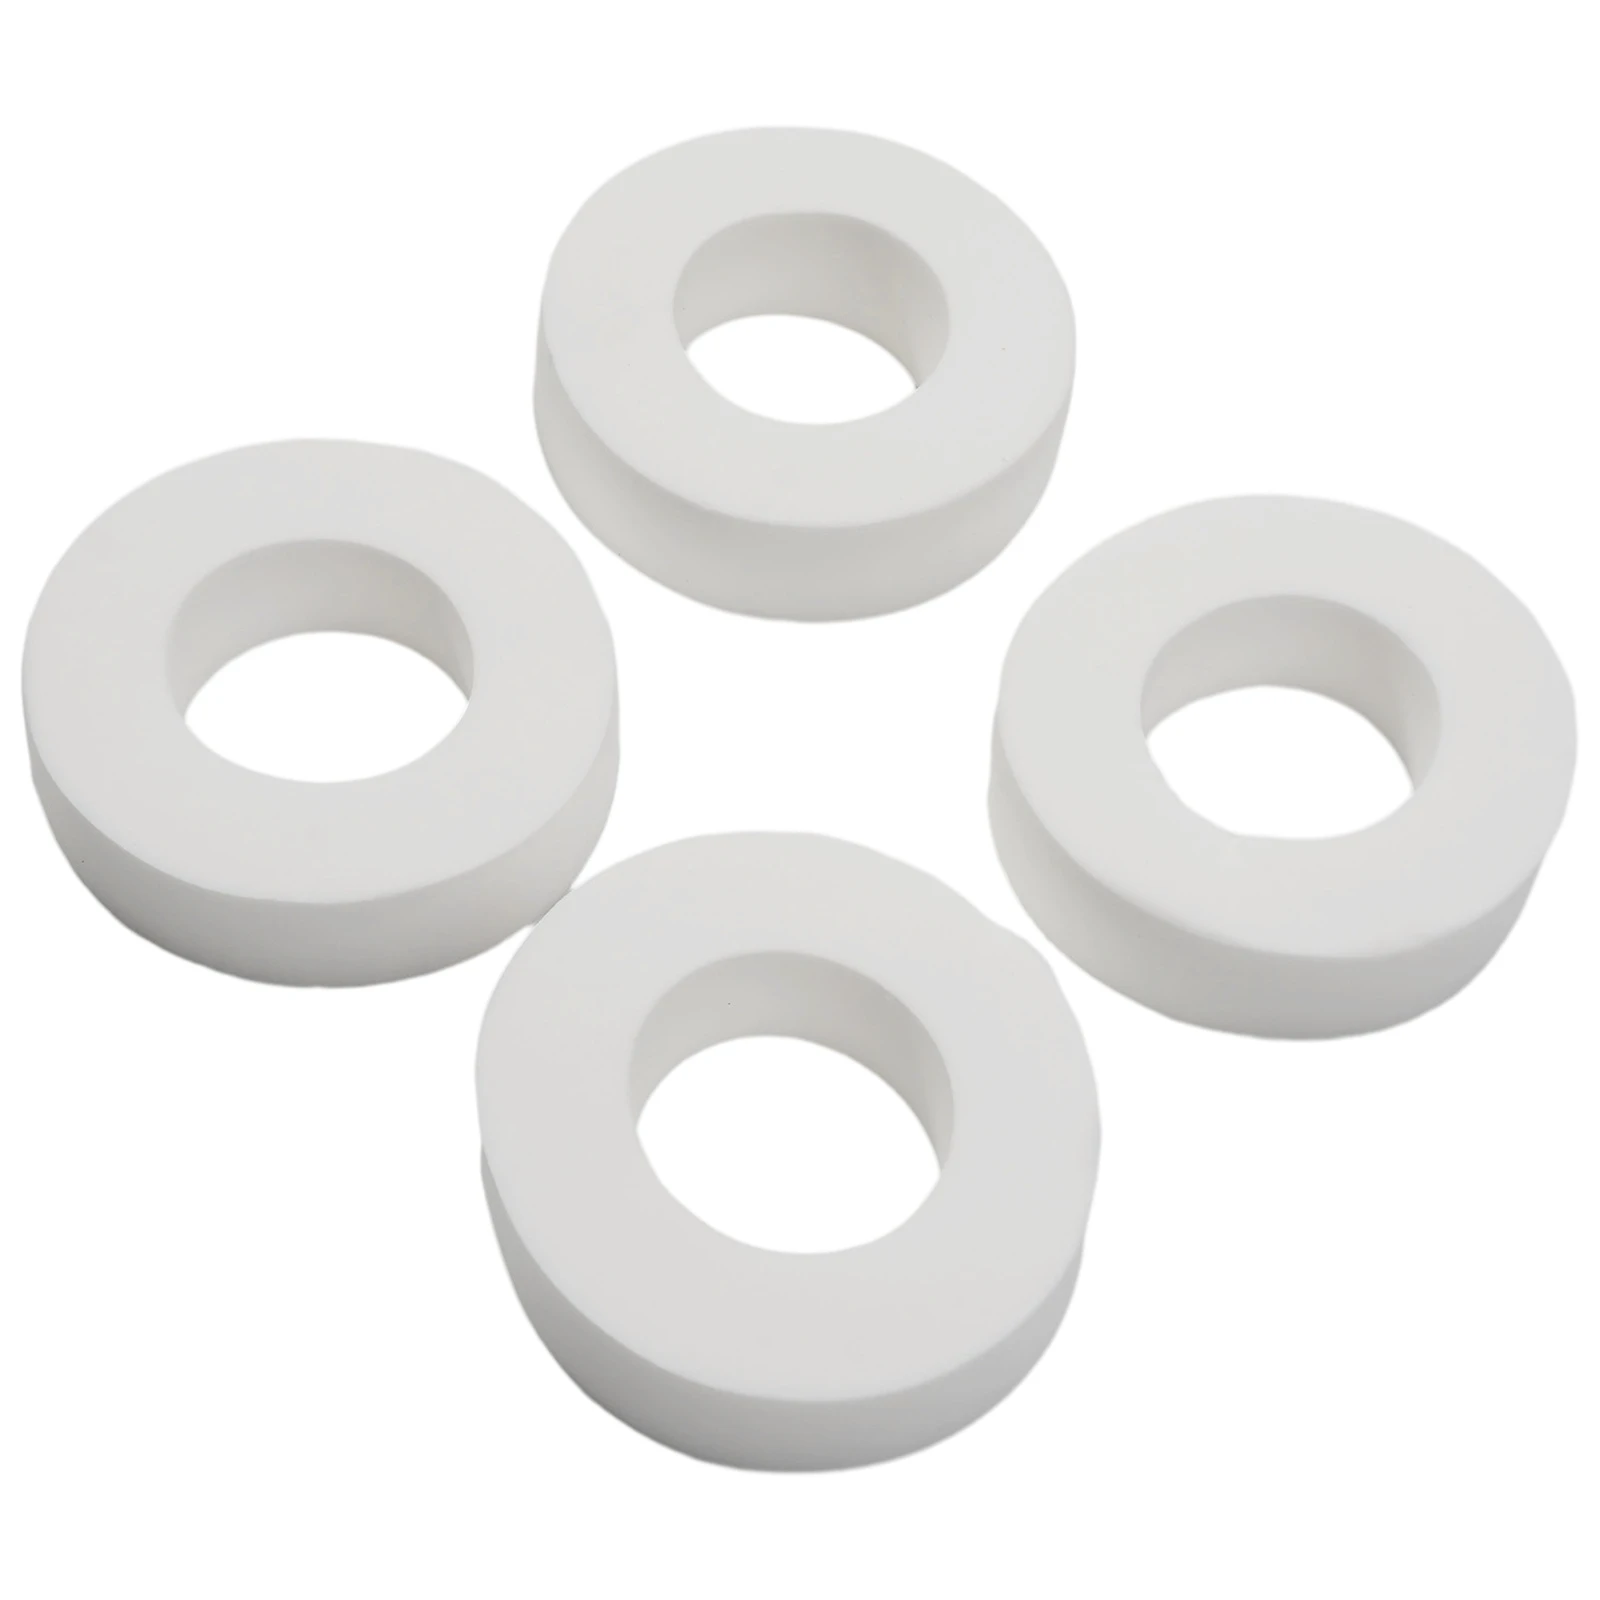 4pcs PVA Climbing Ring For Maytronics For Dolphin 6101611-R4, M200/M400/M500 Swimming Pool Robot Wheel Cover Replacement